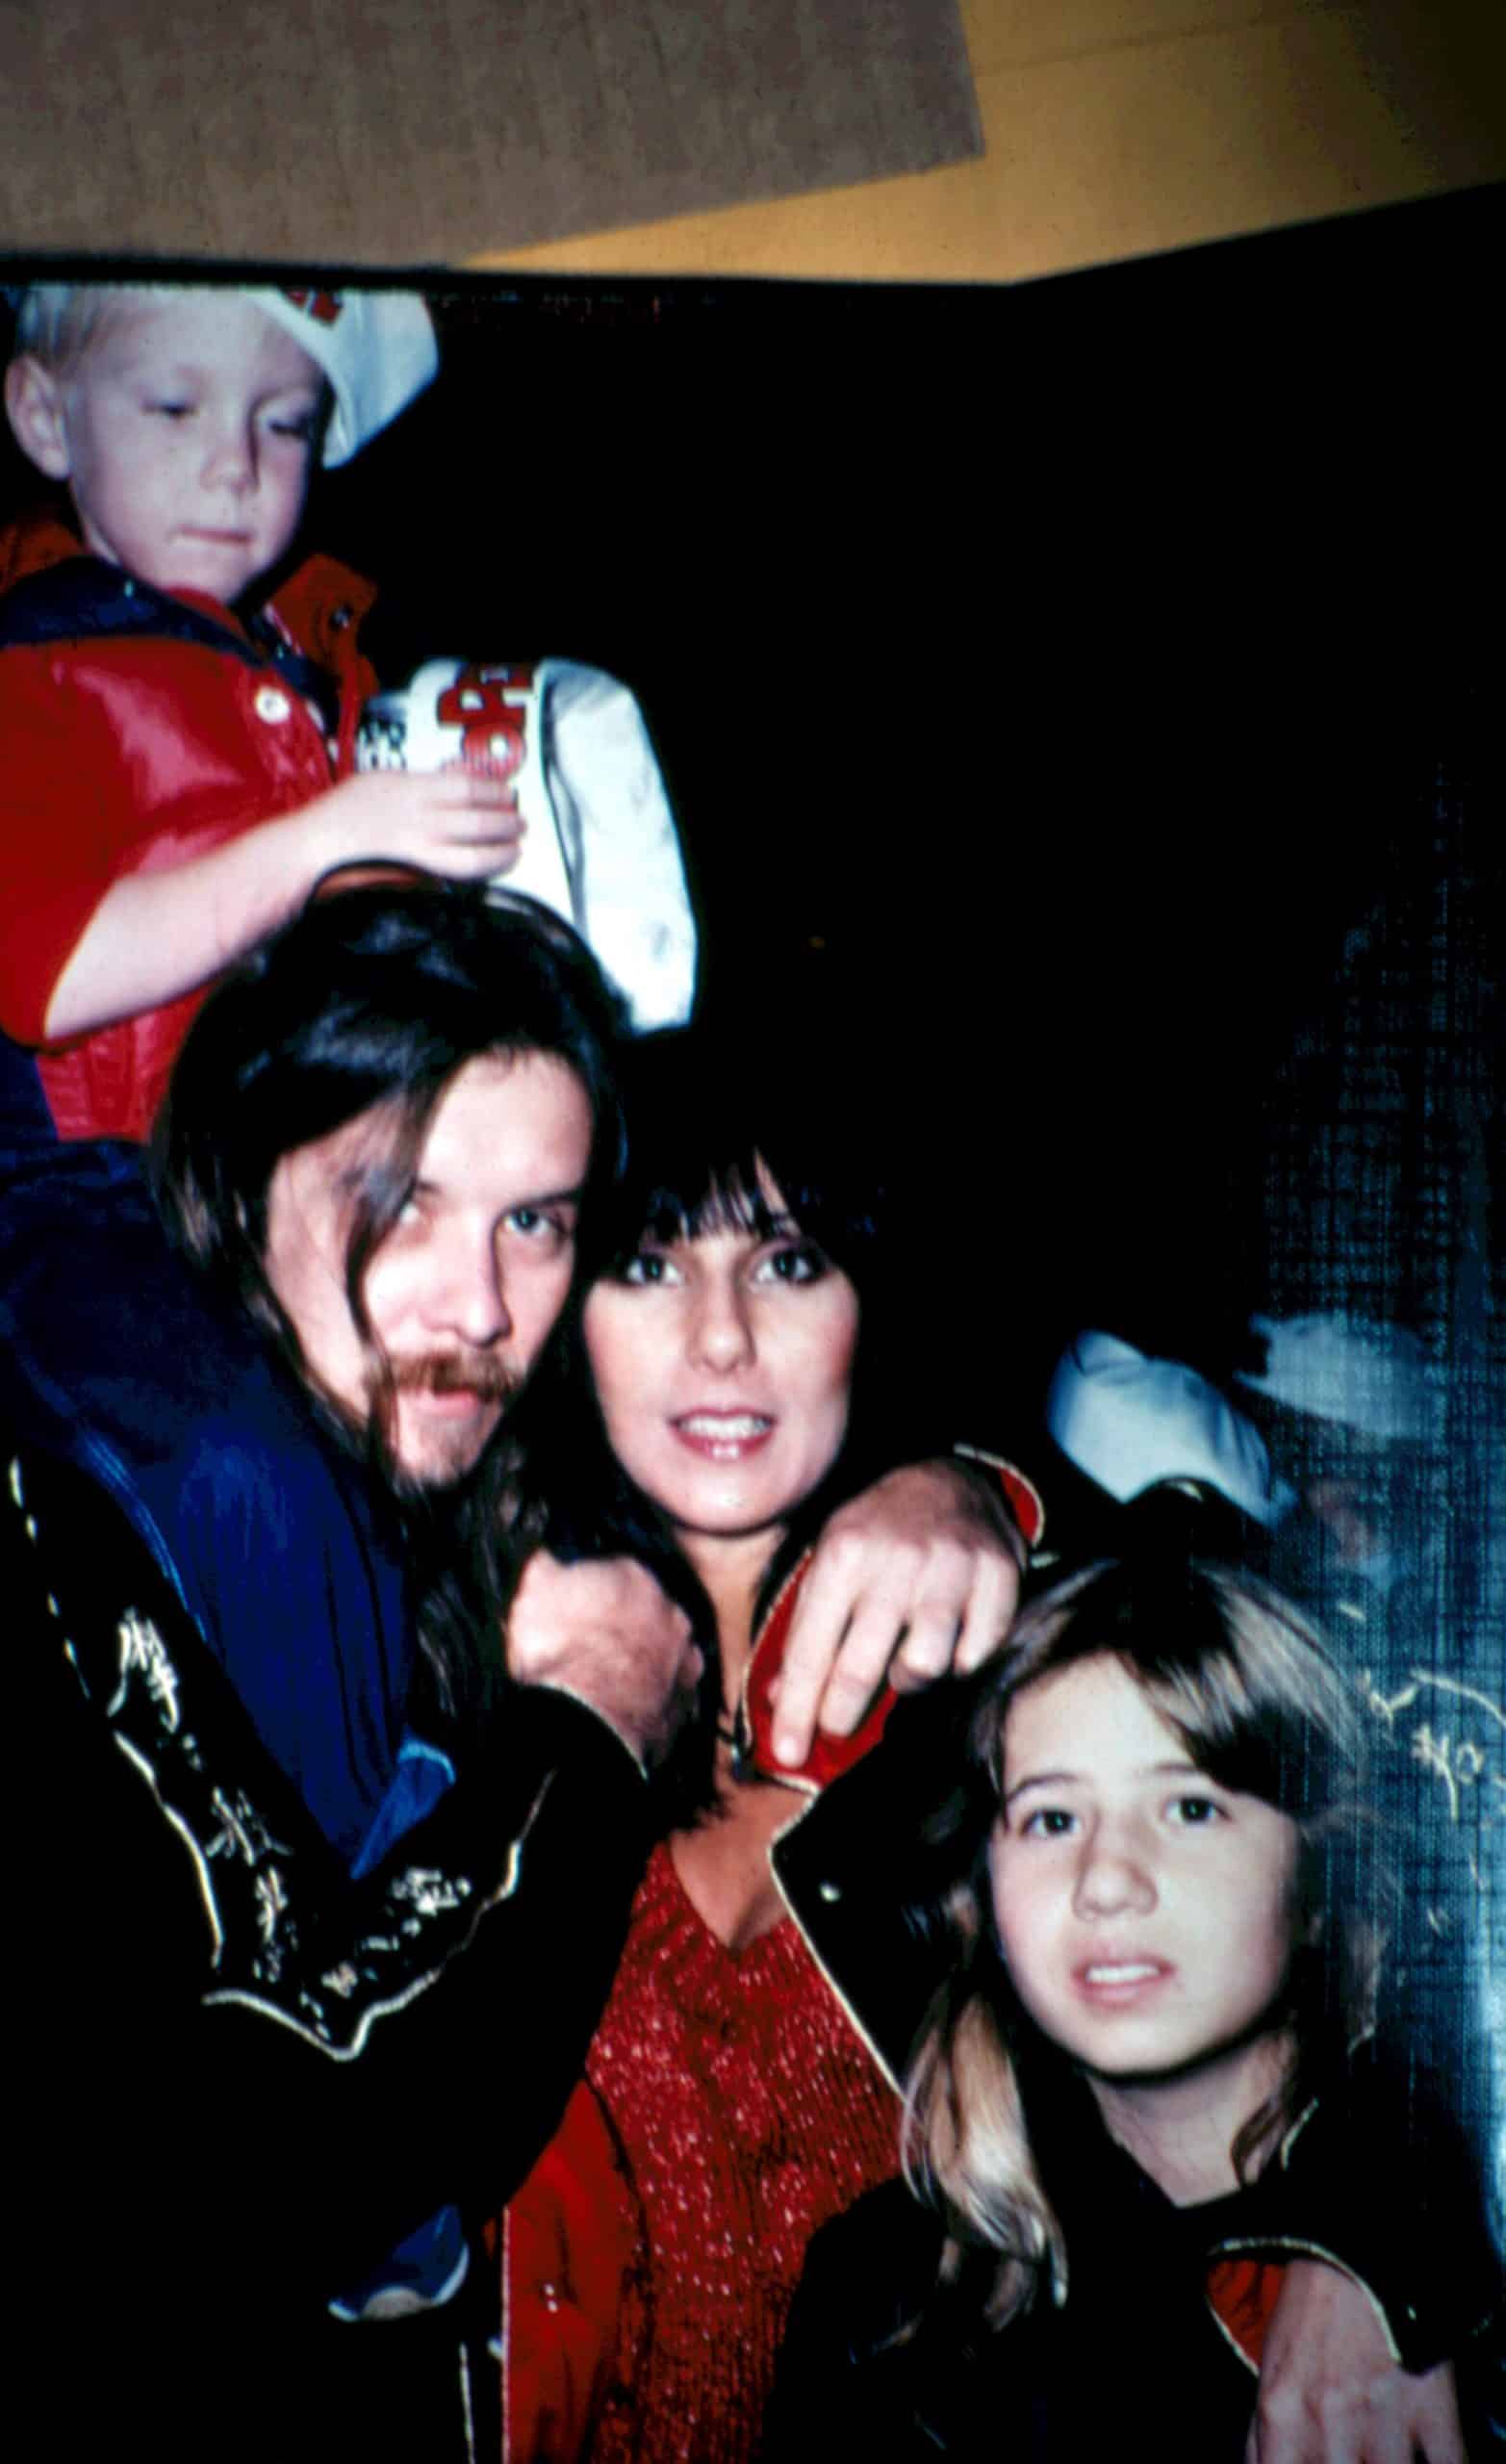 Cher and her kids Elijah Blue, and Chastity Bono